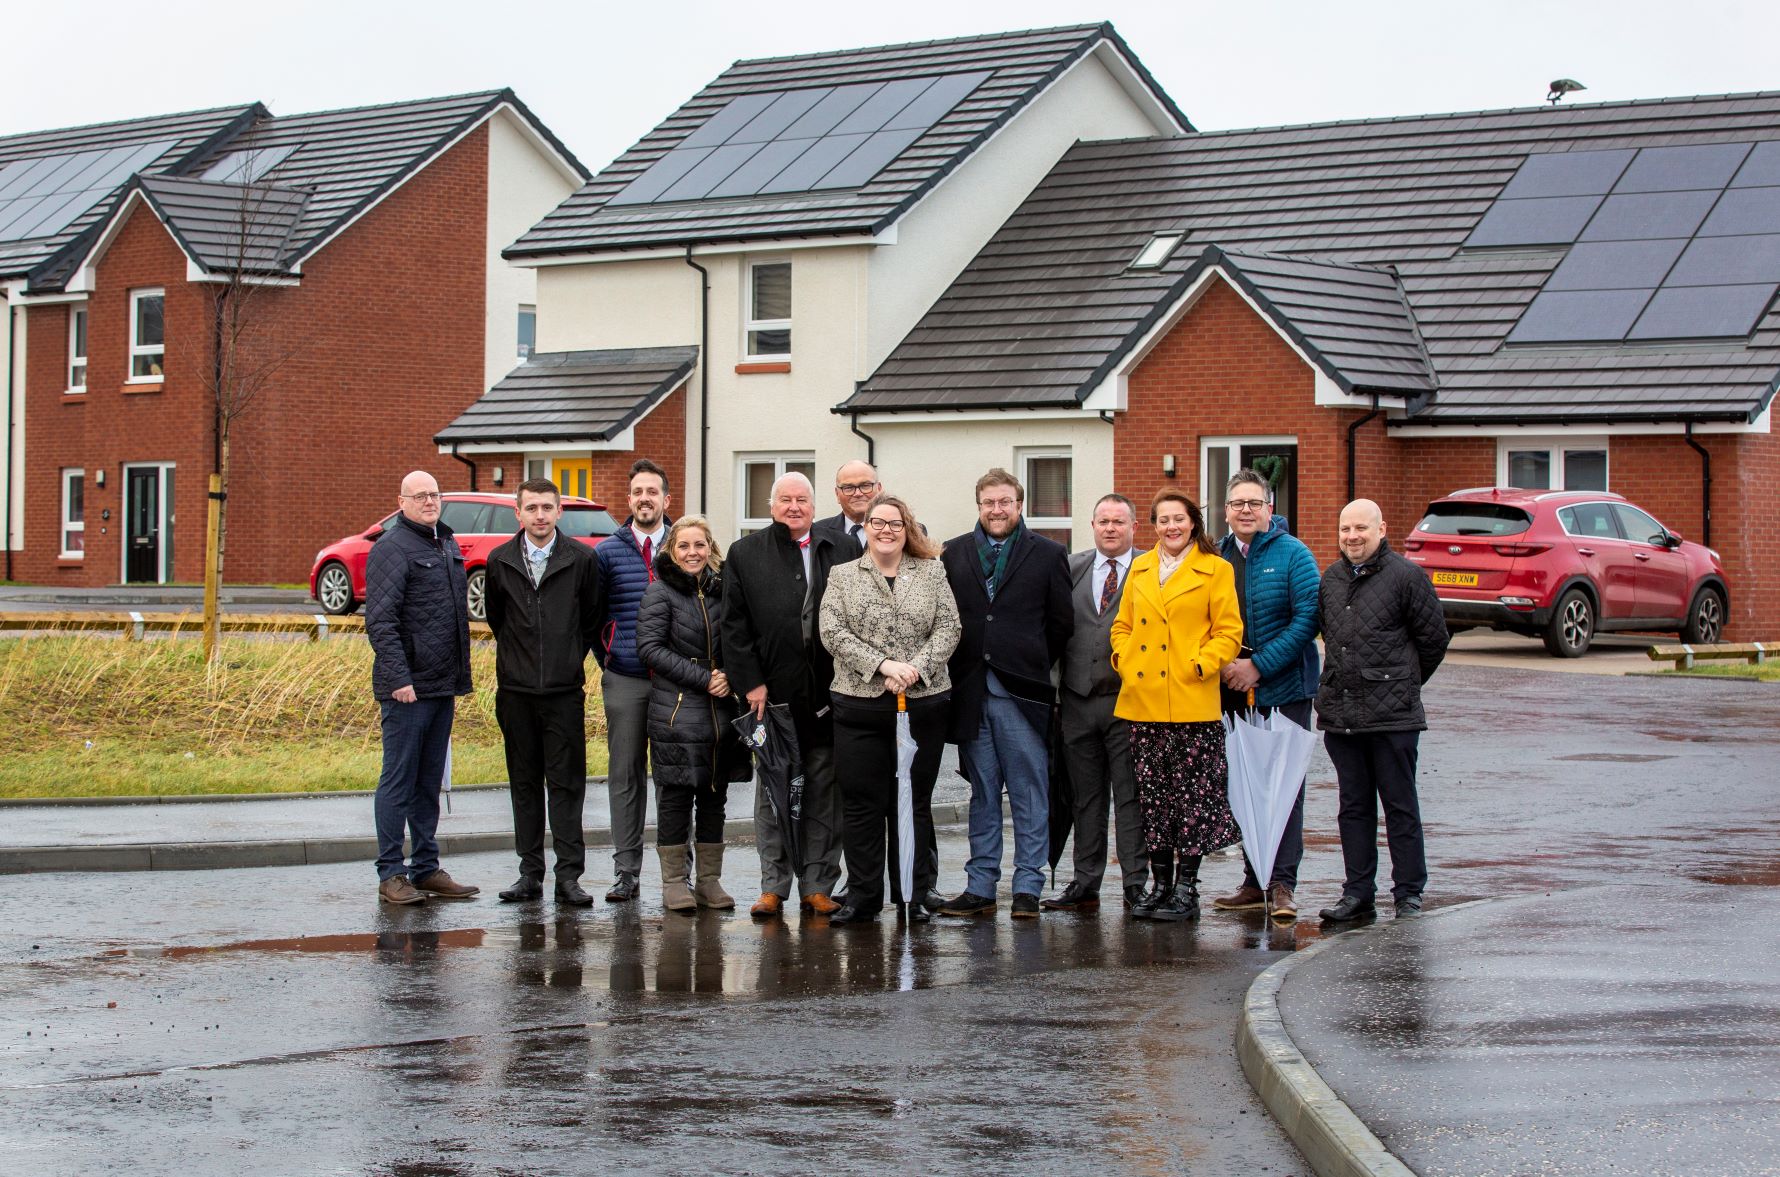 New council homes completed at former Plains school site